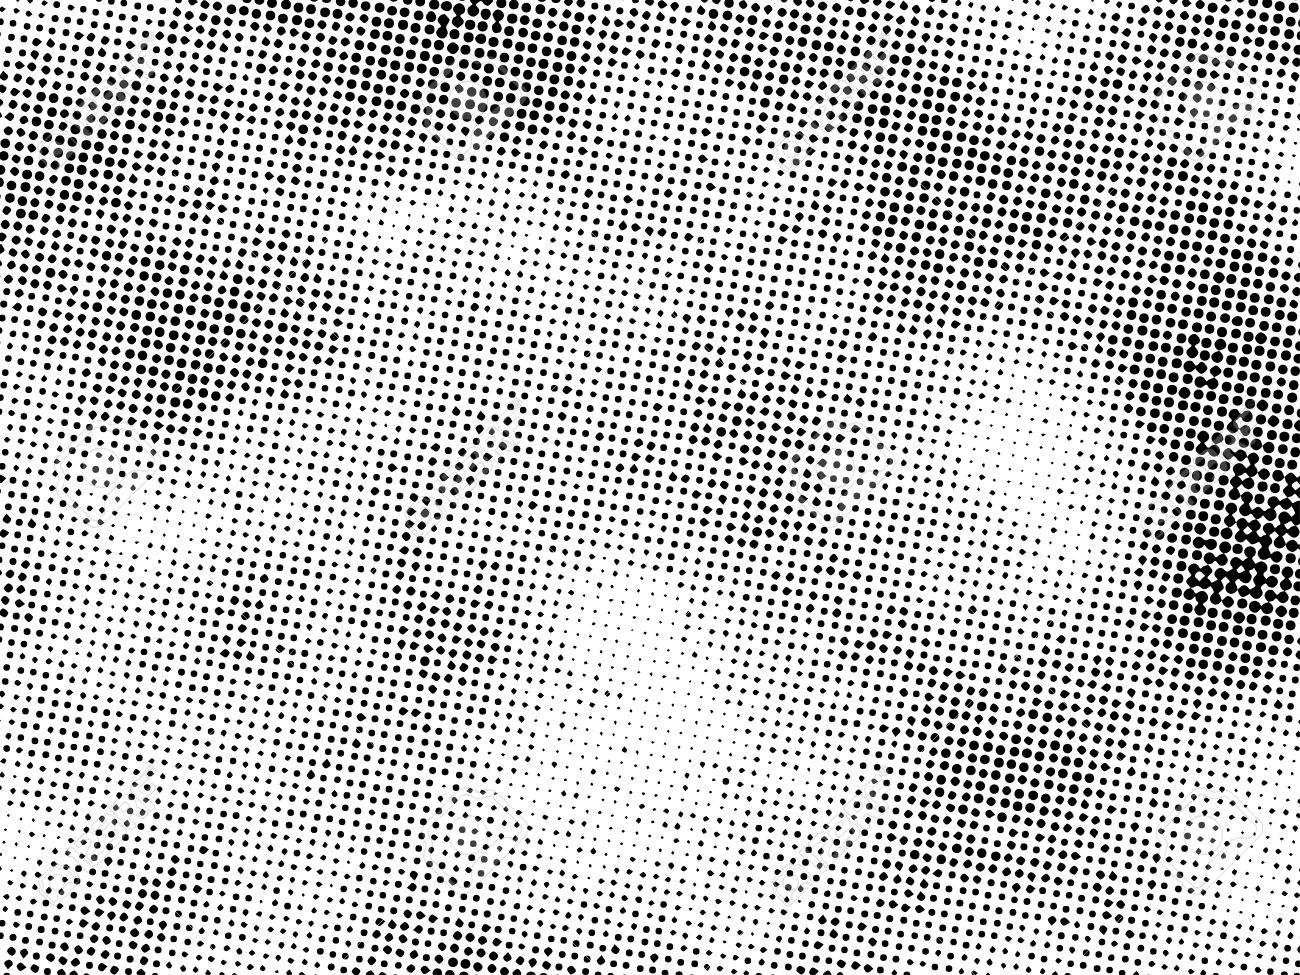 51559665-halftone-dots-vector-texture-black-and-white-colored-grunge-halftone-background-.jpg